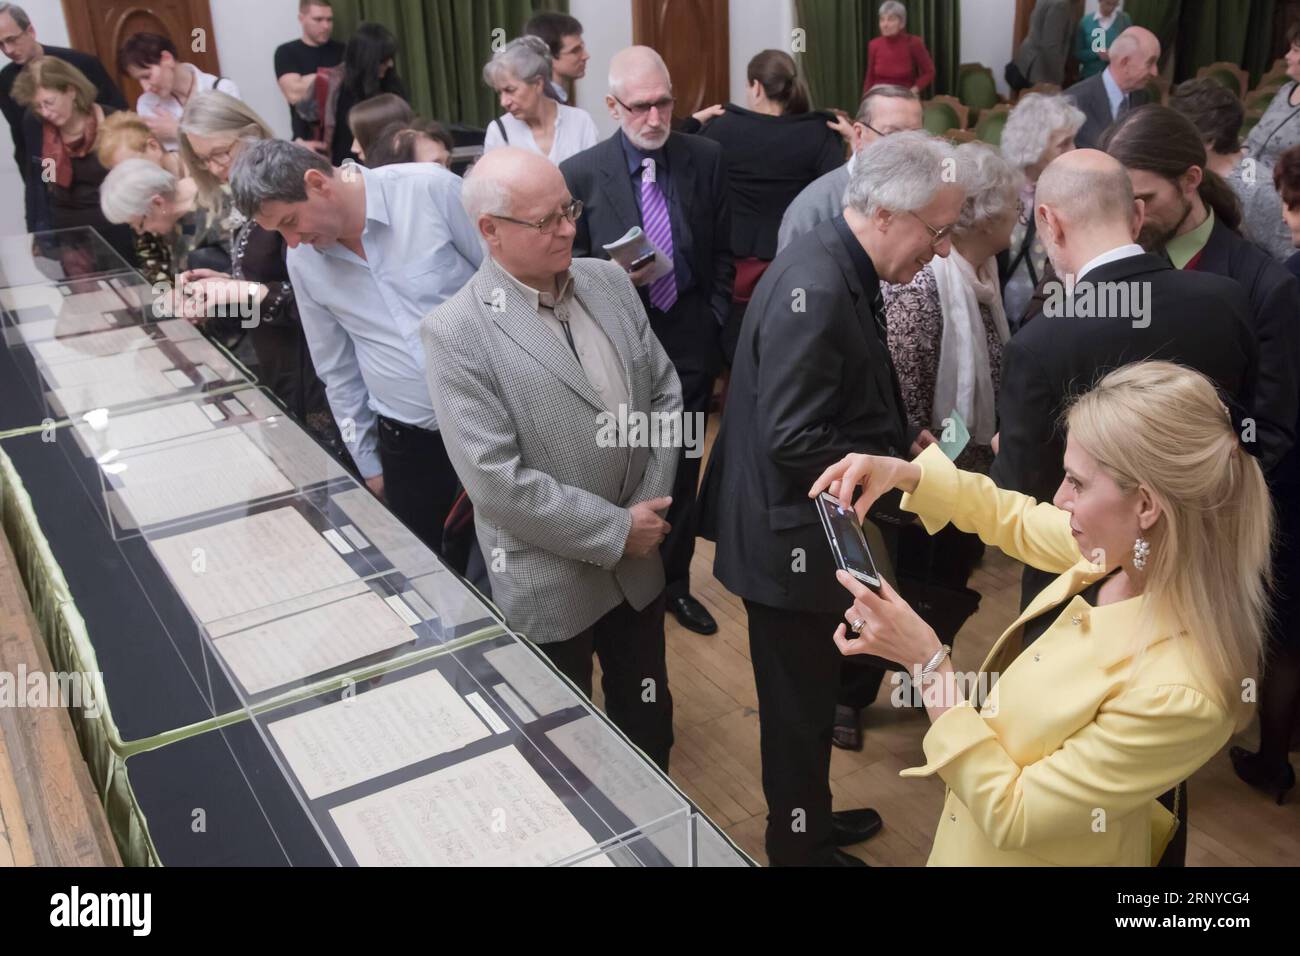 (180311) -- BUDAPEST, March 11, 2018 -- People view Hungarian composer Franz Liszt s manuscripts which are previously thought lost in the Franz Liszt Memorial Museum and Research Center in Budapest, Hungary, on March 10, 2018. The manuscripts believed to be of famous Hungarian composer Franz Liszt were presented in the museum on Saturday in a solemn ceremony. )(gj) HUNGARY-BUDAPEST-LISZT-MANUSCRIPTS AttilaxVolgyi PUBLICATIONxNOTxINxCHN Stock Photo